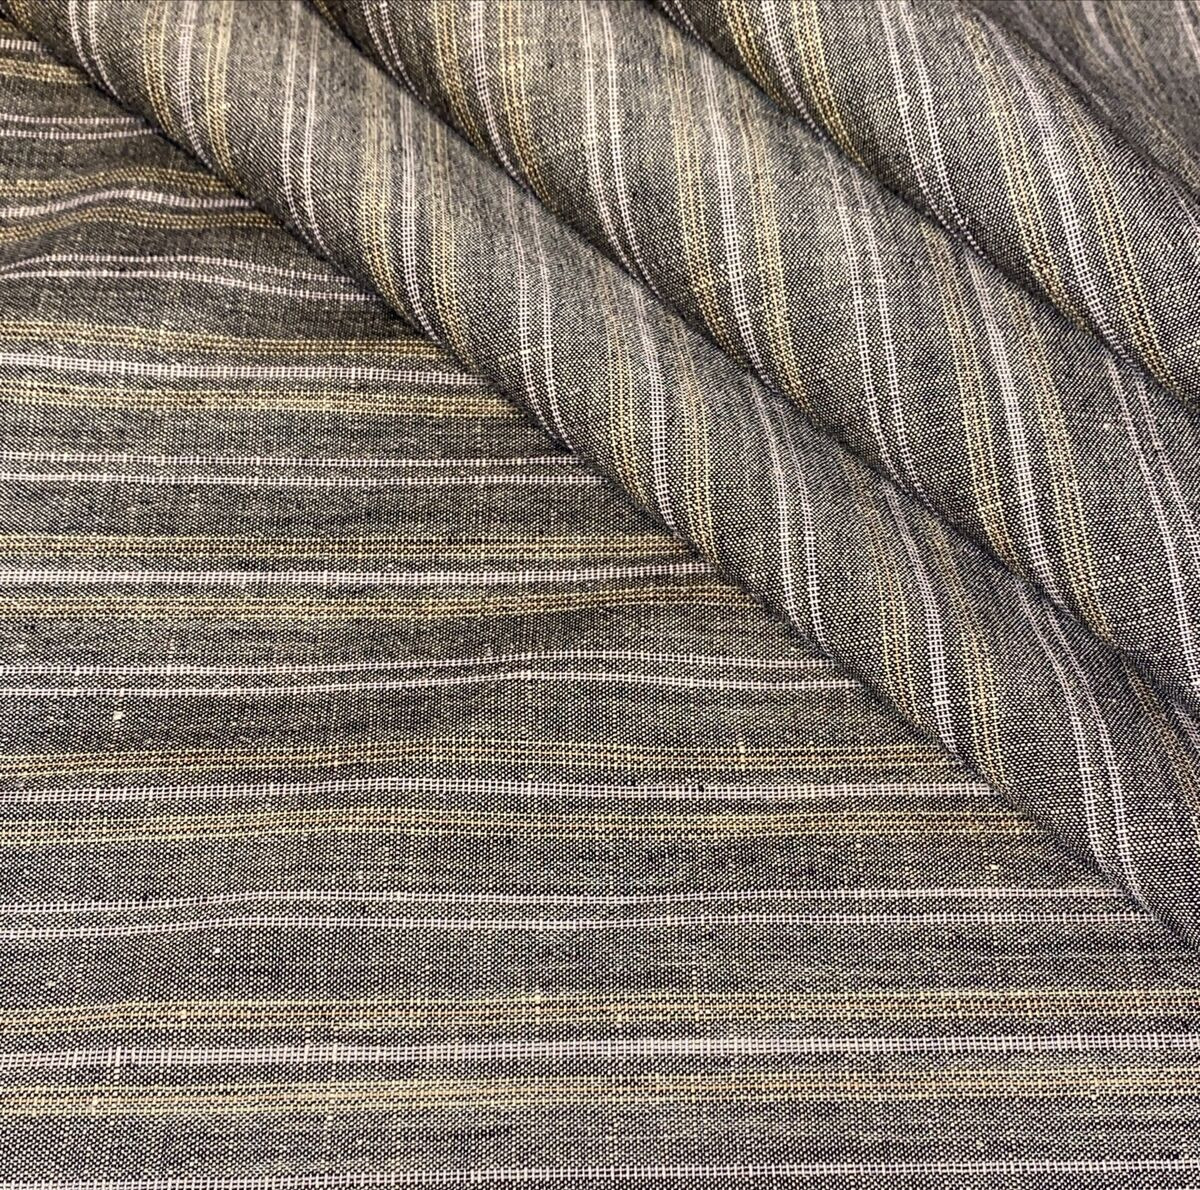 Rare Vintage 100% Silk Striped Fabric By The Yard